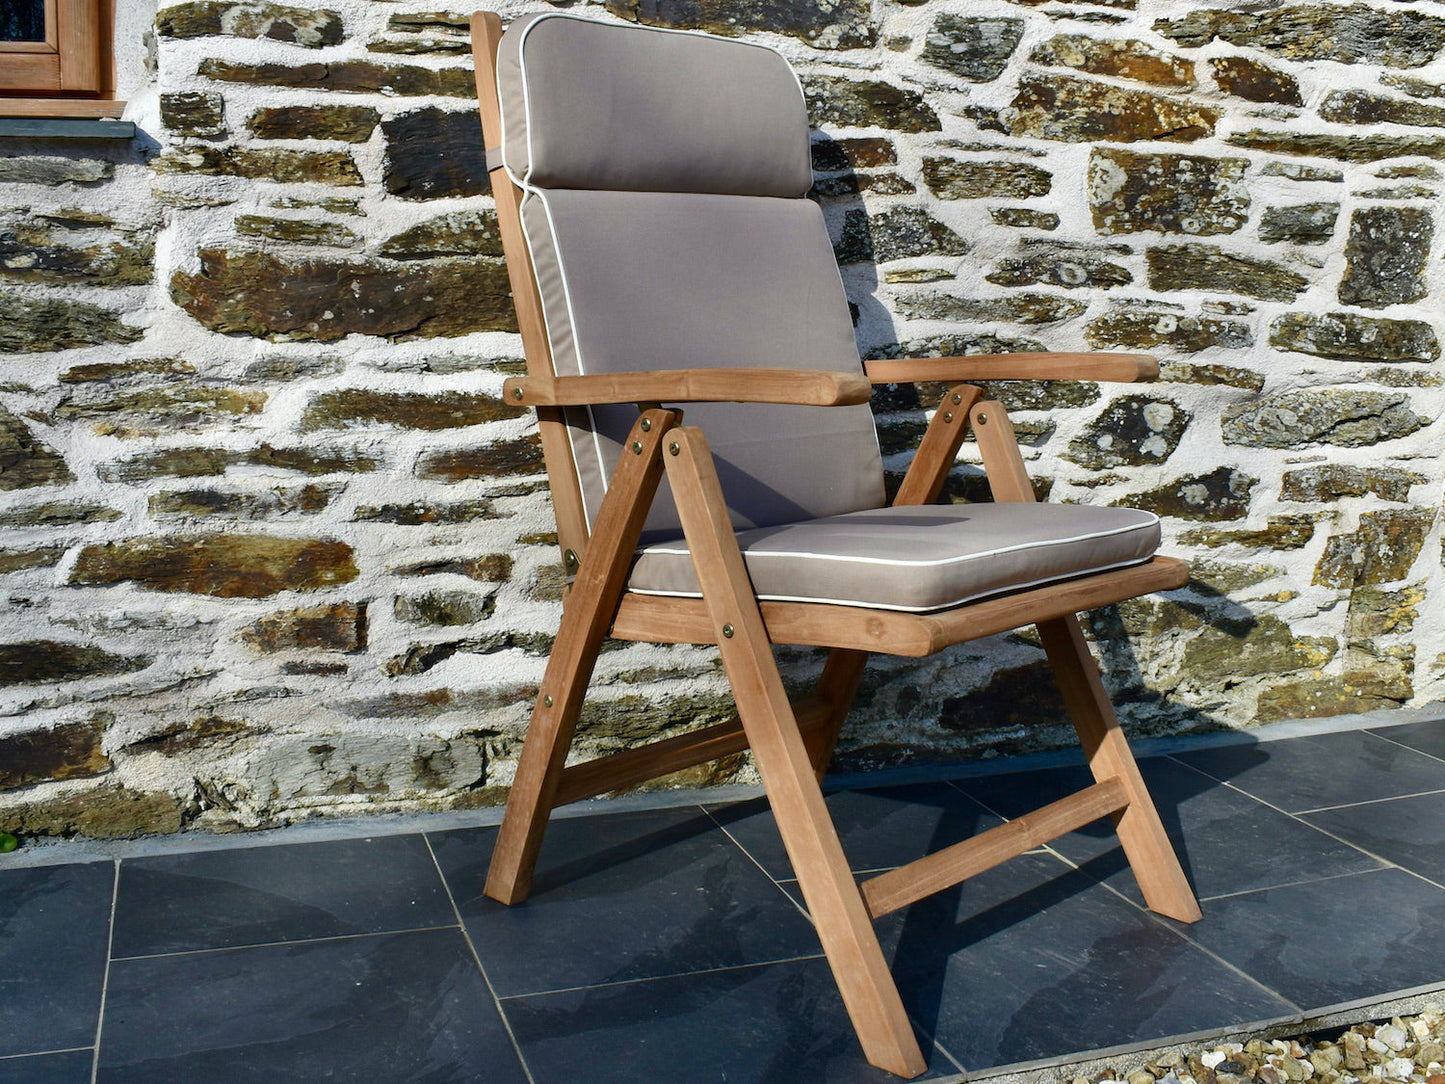 Taupe colour outdoor cushion for a garden recliner chair with contrast white piping